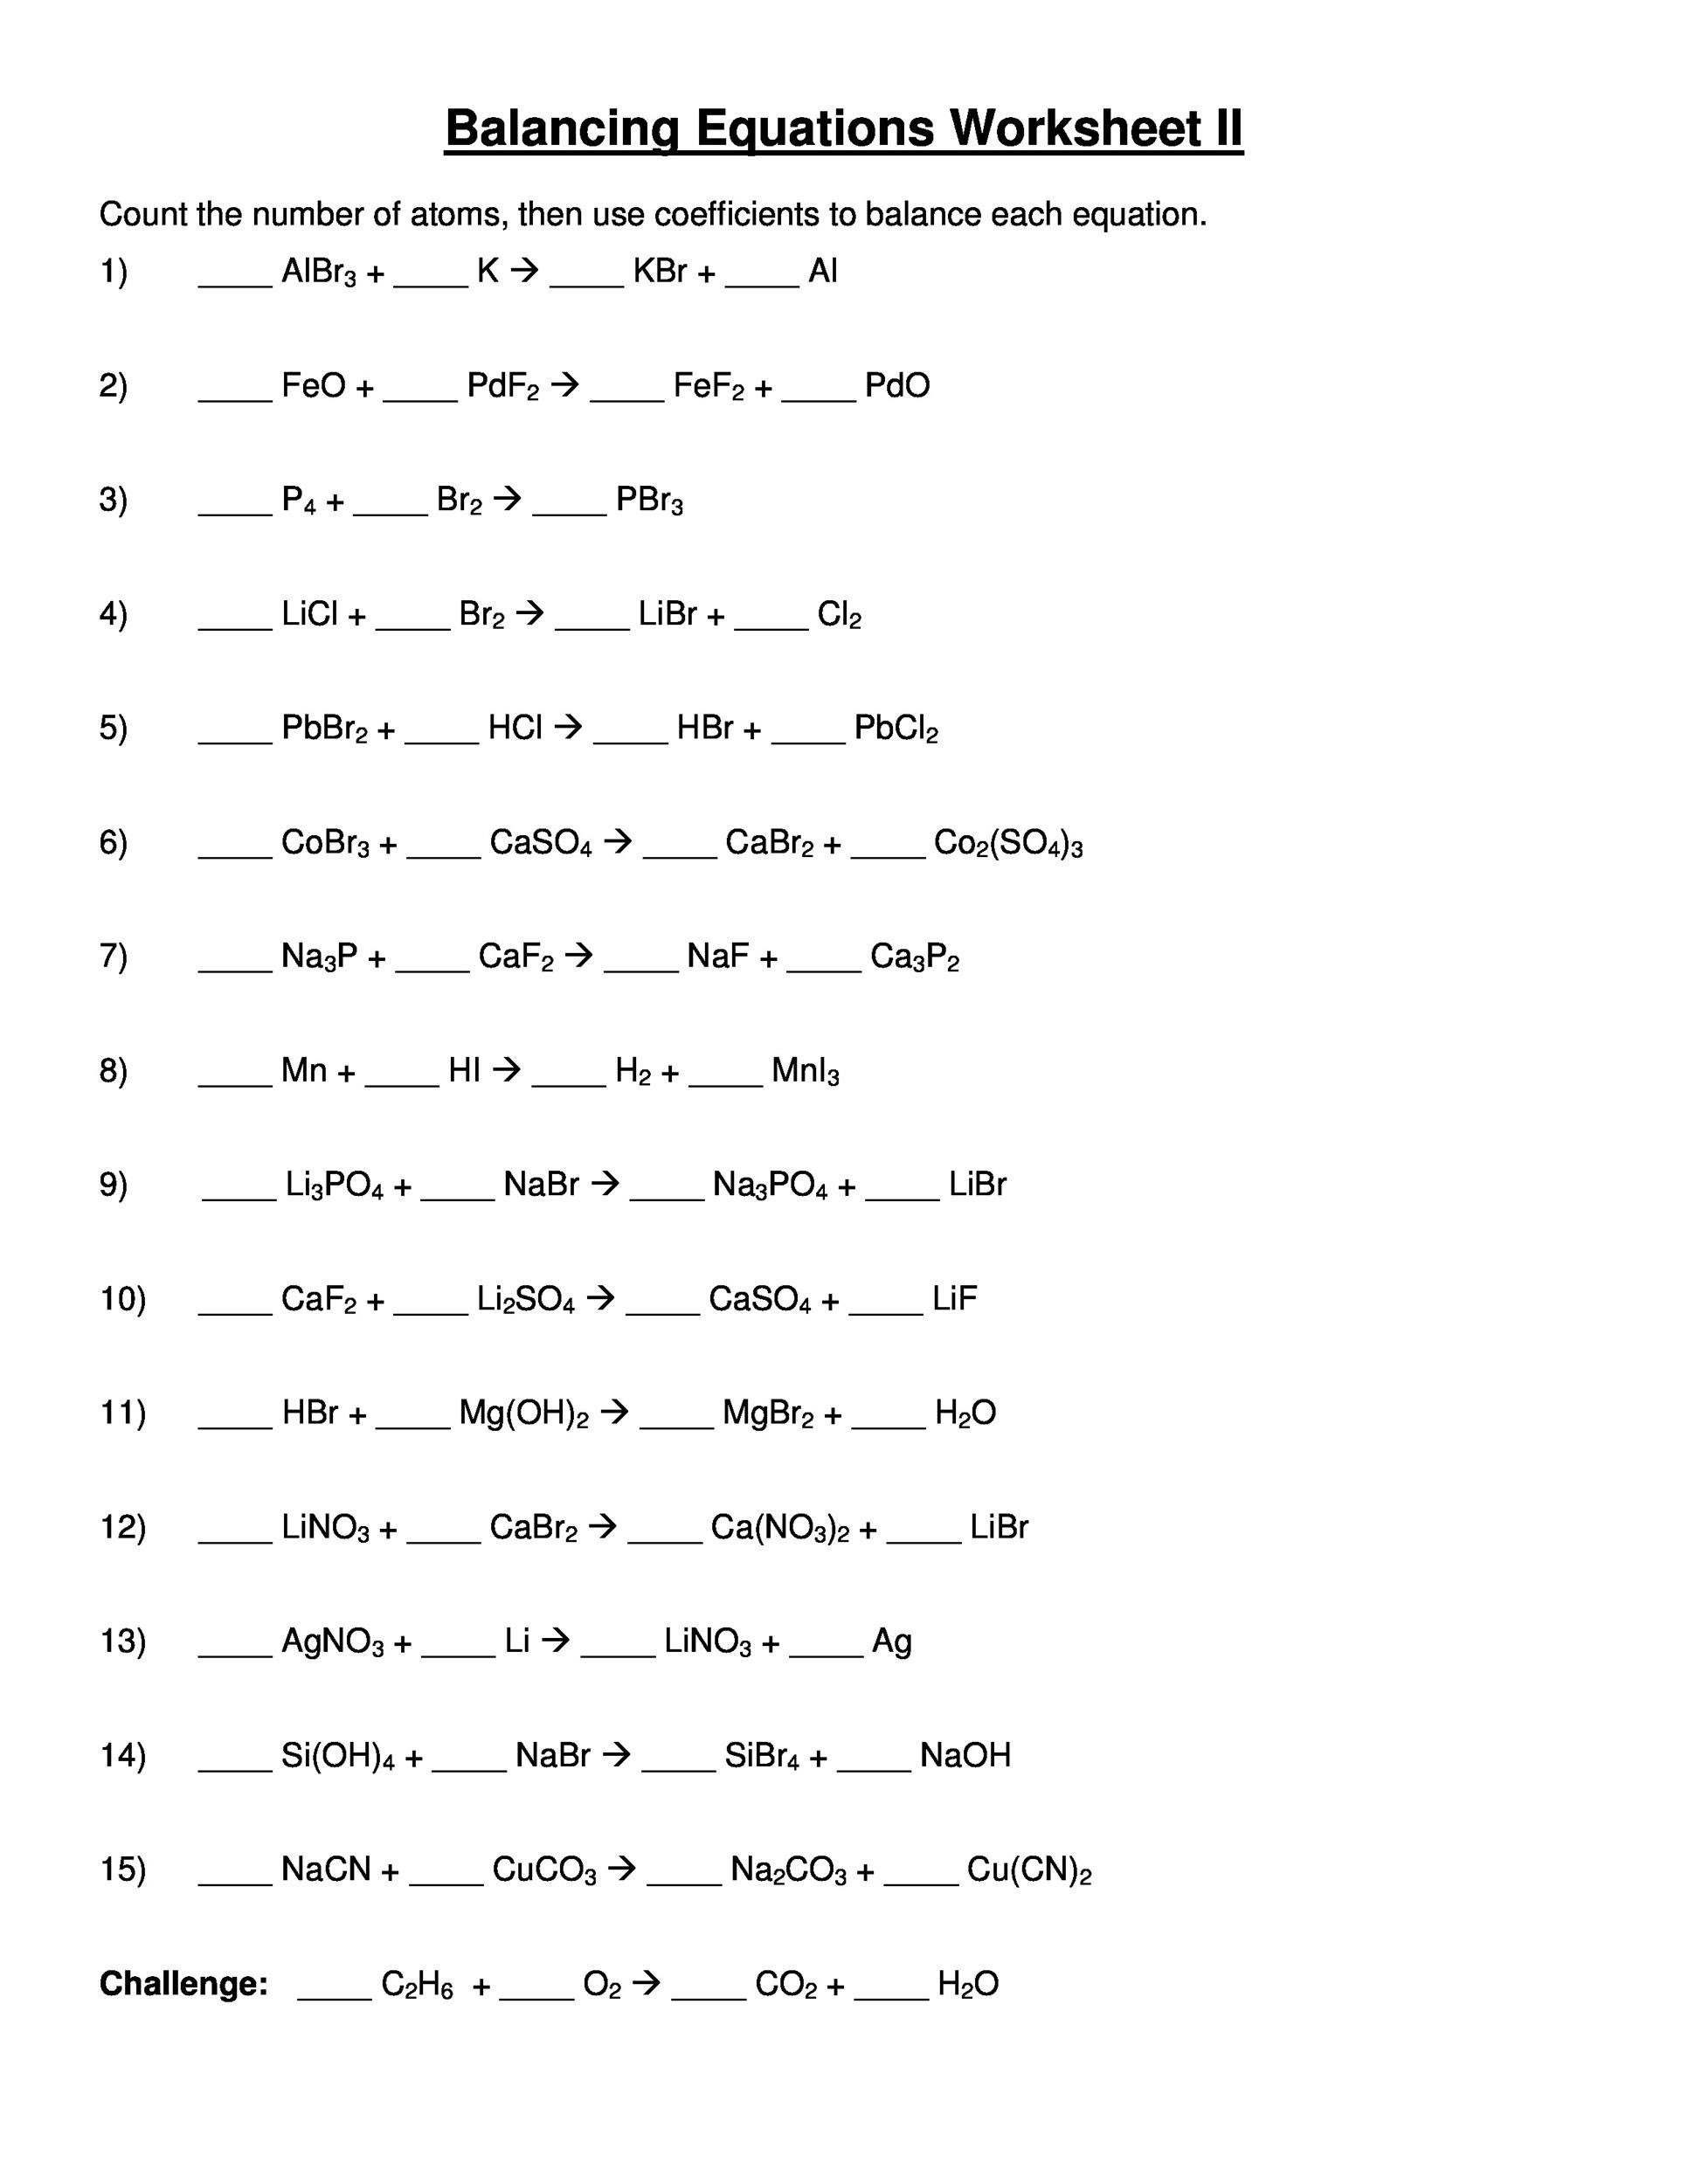 Balancing Equations Worksheet » Health And Fitness Training Pertaining To Balancing Equation Worksheet With Answers